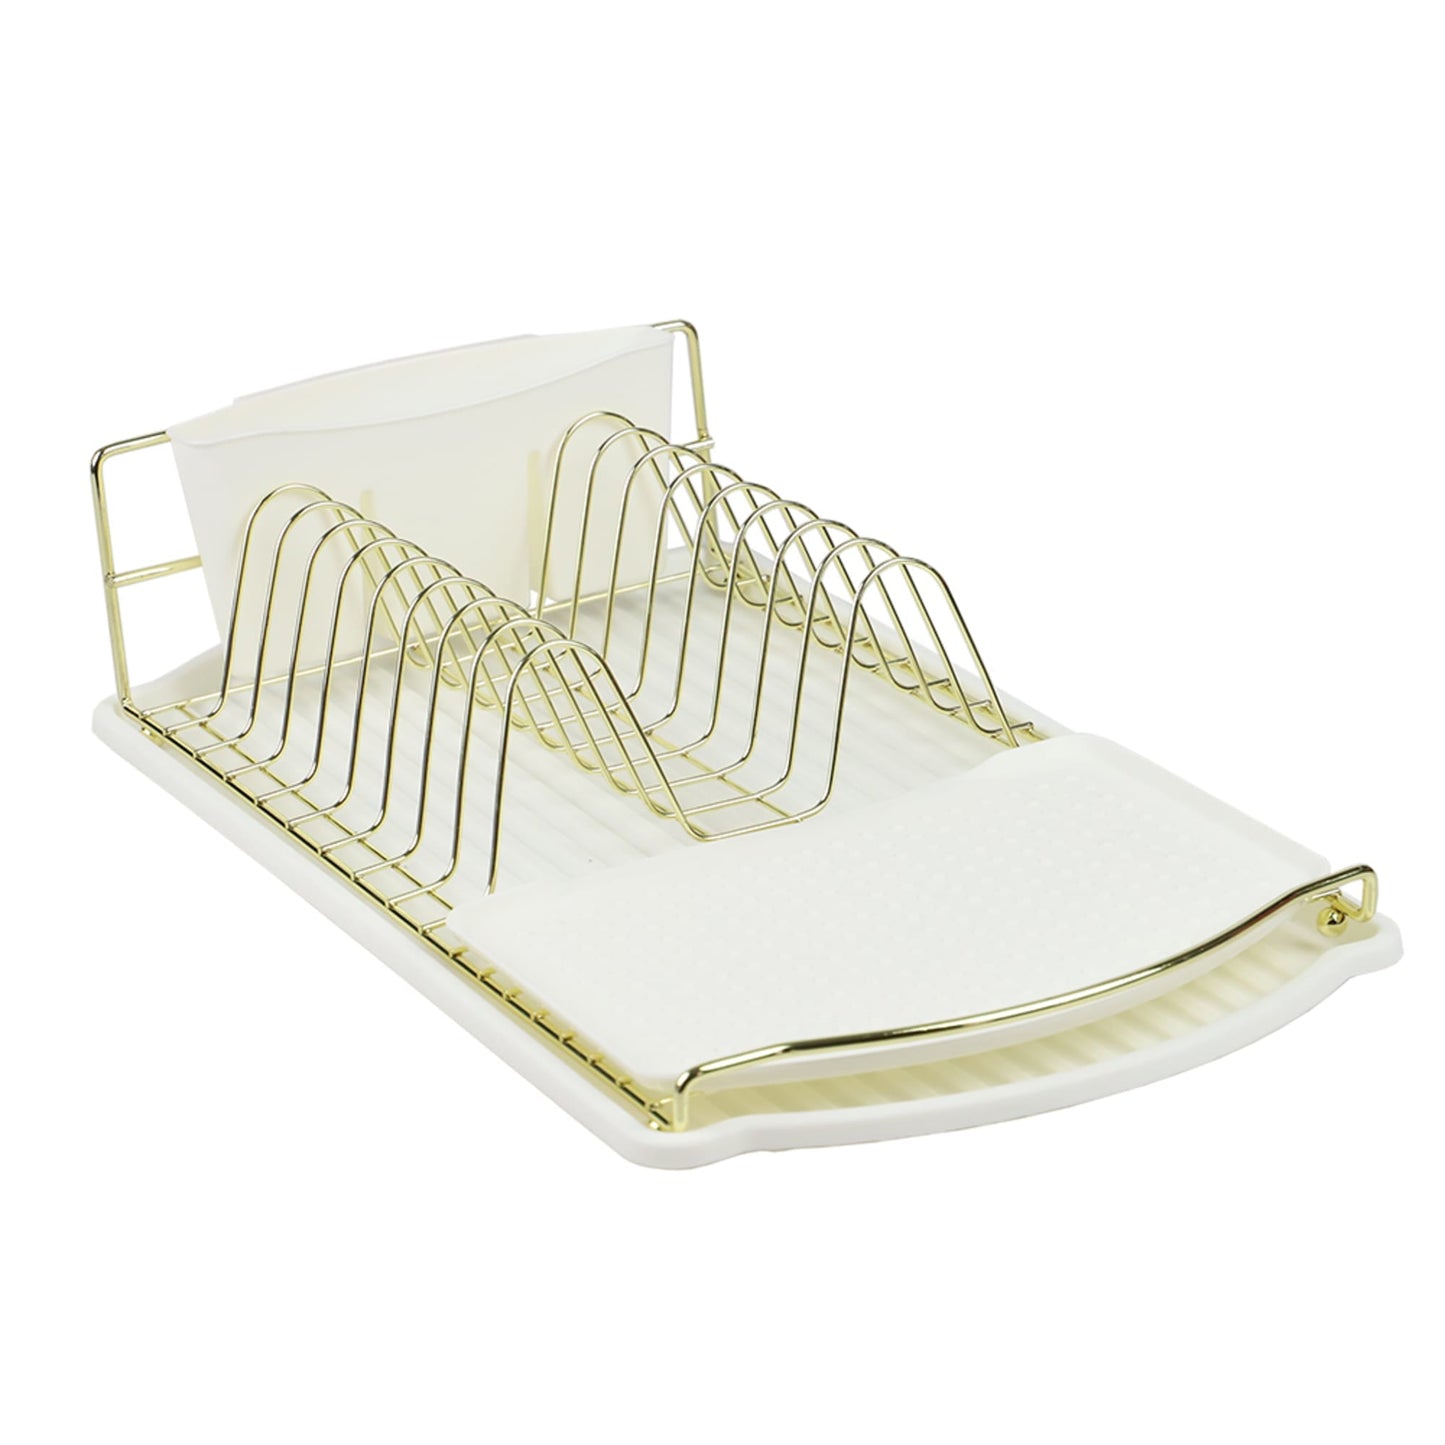 Michael Graves Design Gold Finish Steel Wire Compact Dish Rack with Oversized Utensil Holder, White